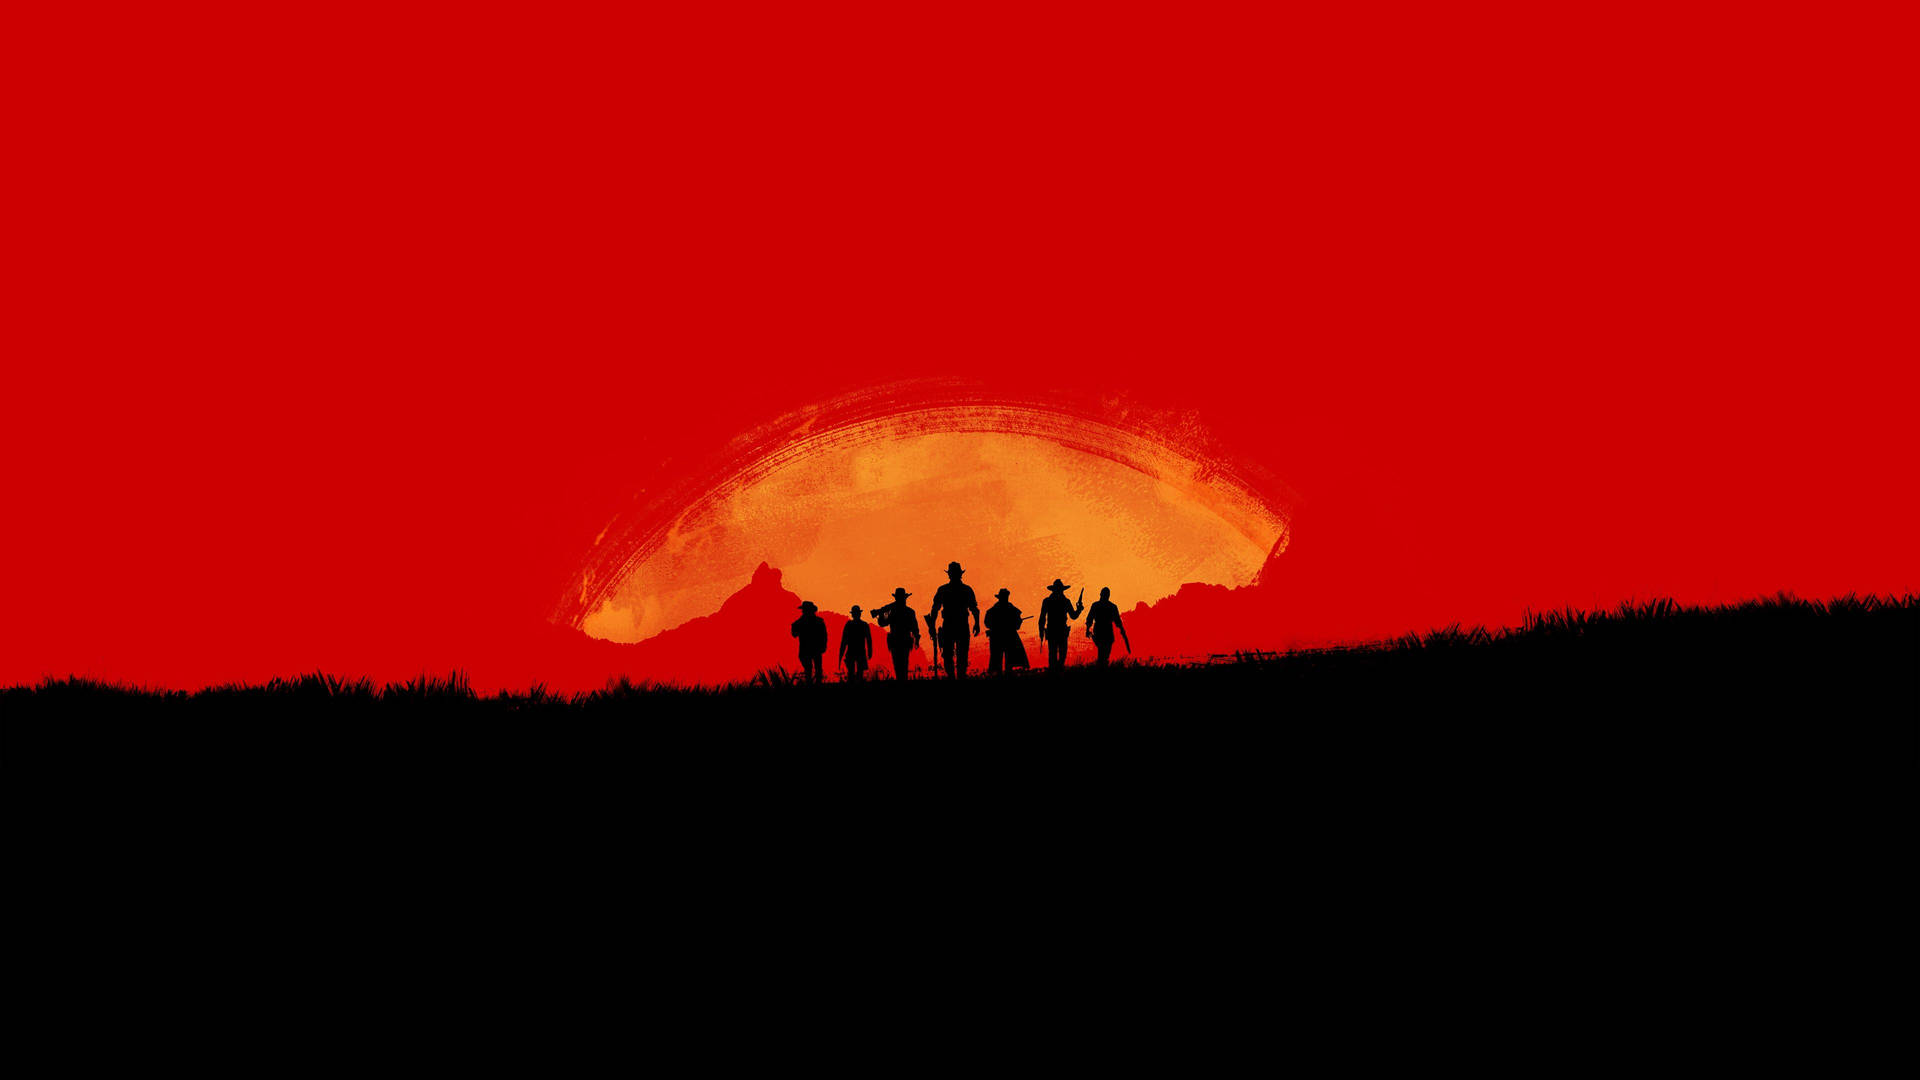 Oled 4k Red Dead Redemption 2 Silhouettes Background